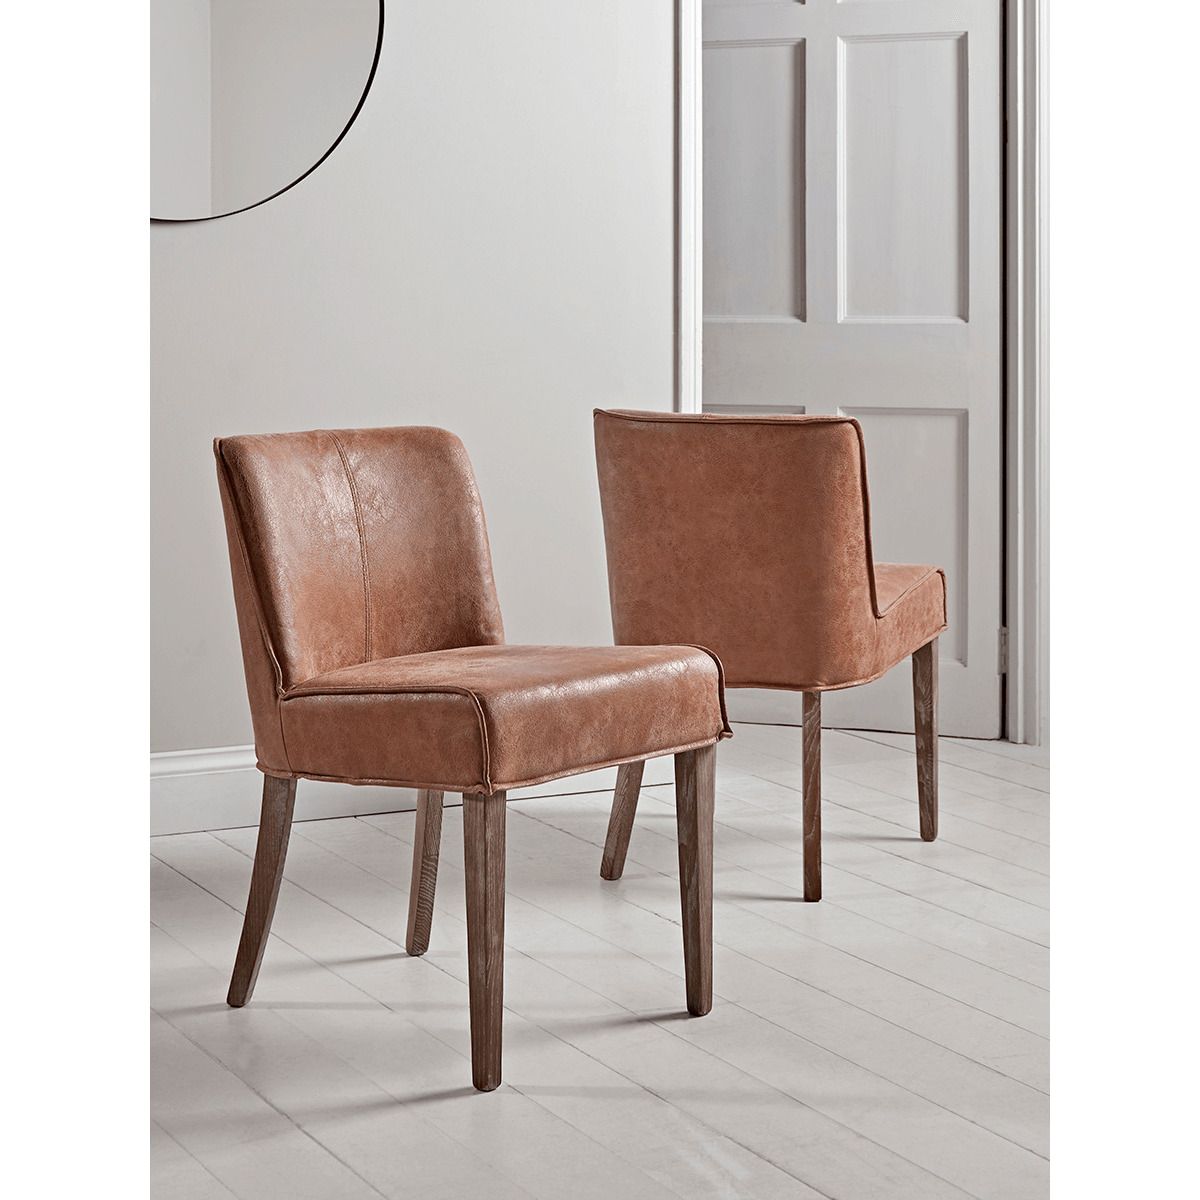 Two Leather & Wood Dining Chairs - image 1